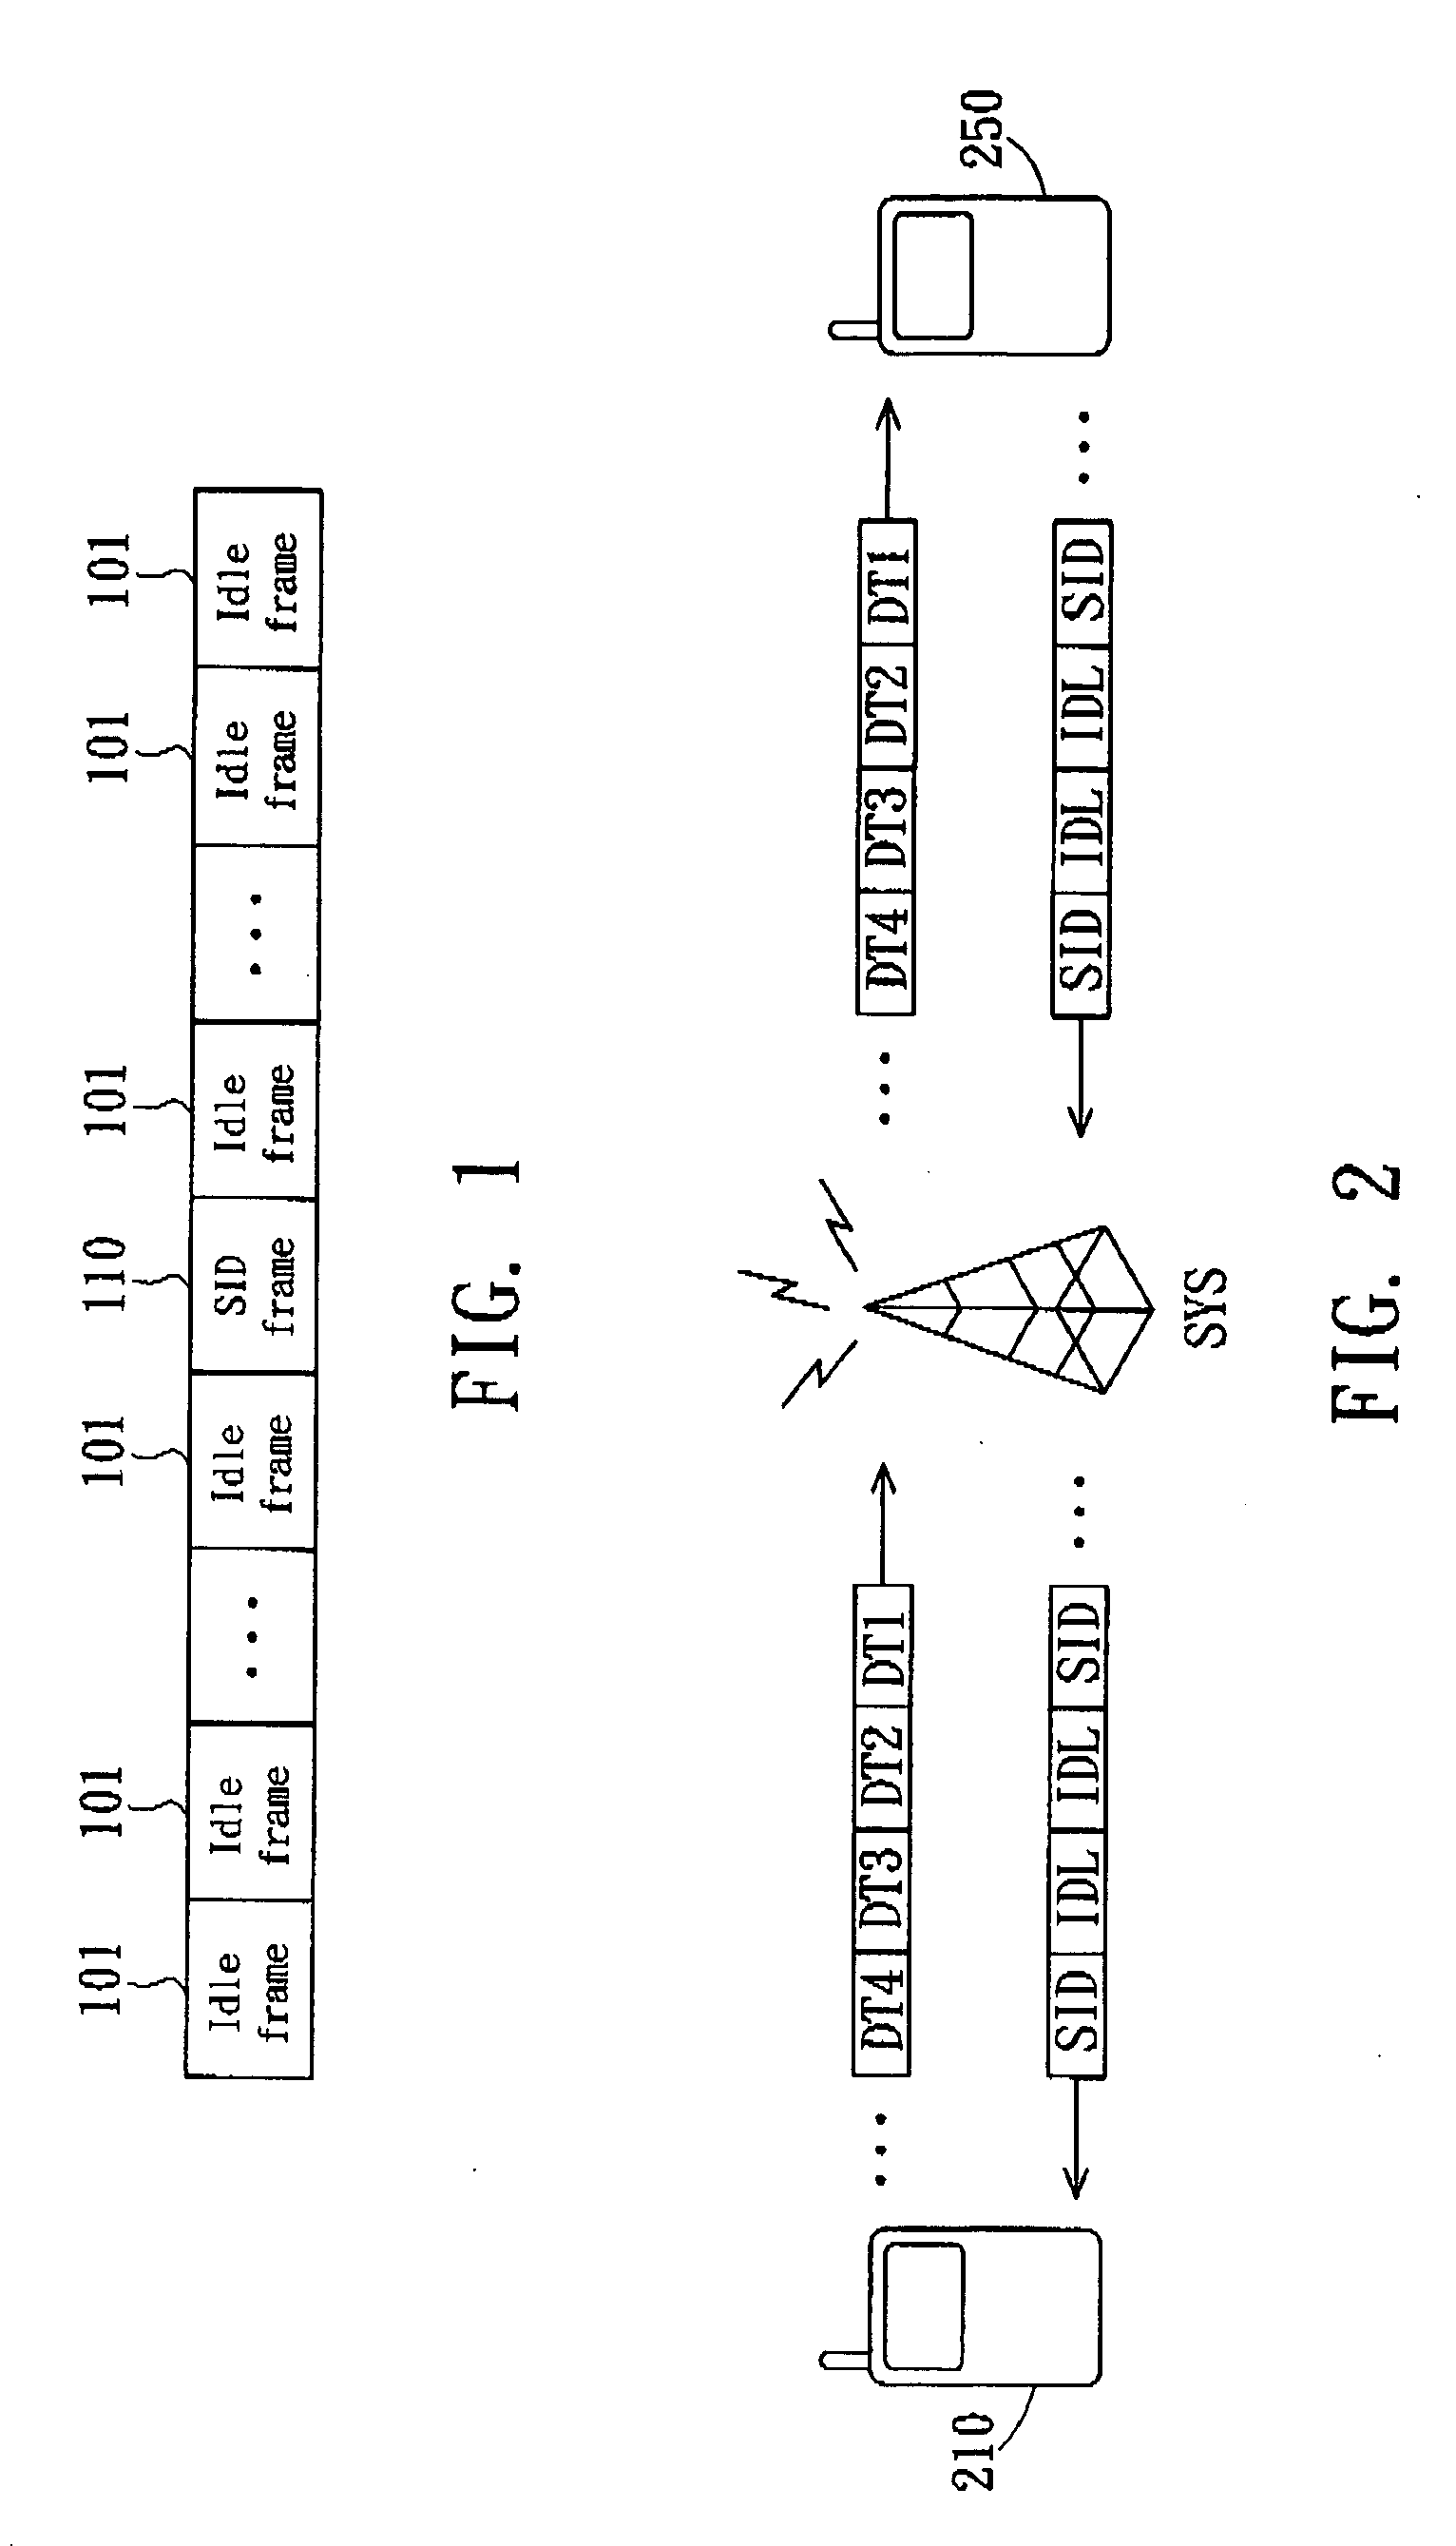 Method for transmitting service data using a discontinuous transmission mode